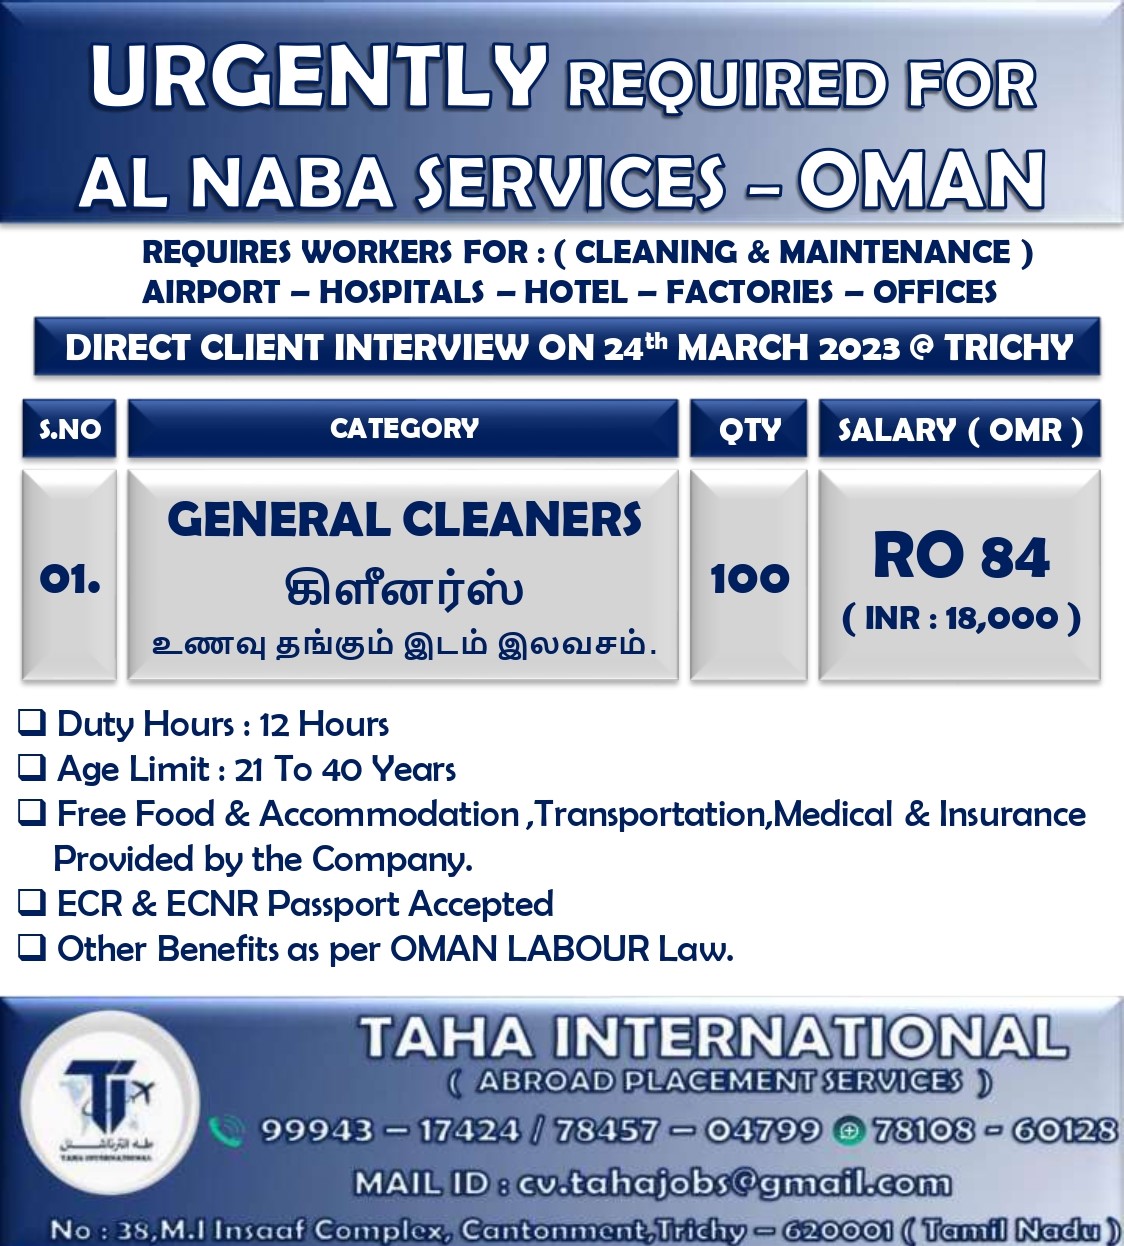 URGENTLY REQ FOR AL NABA - OMAN CLIENT INTERVIEW ON 24TH MARCH 2023-469dabc3